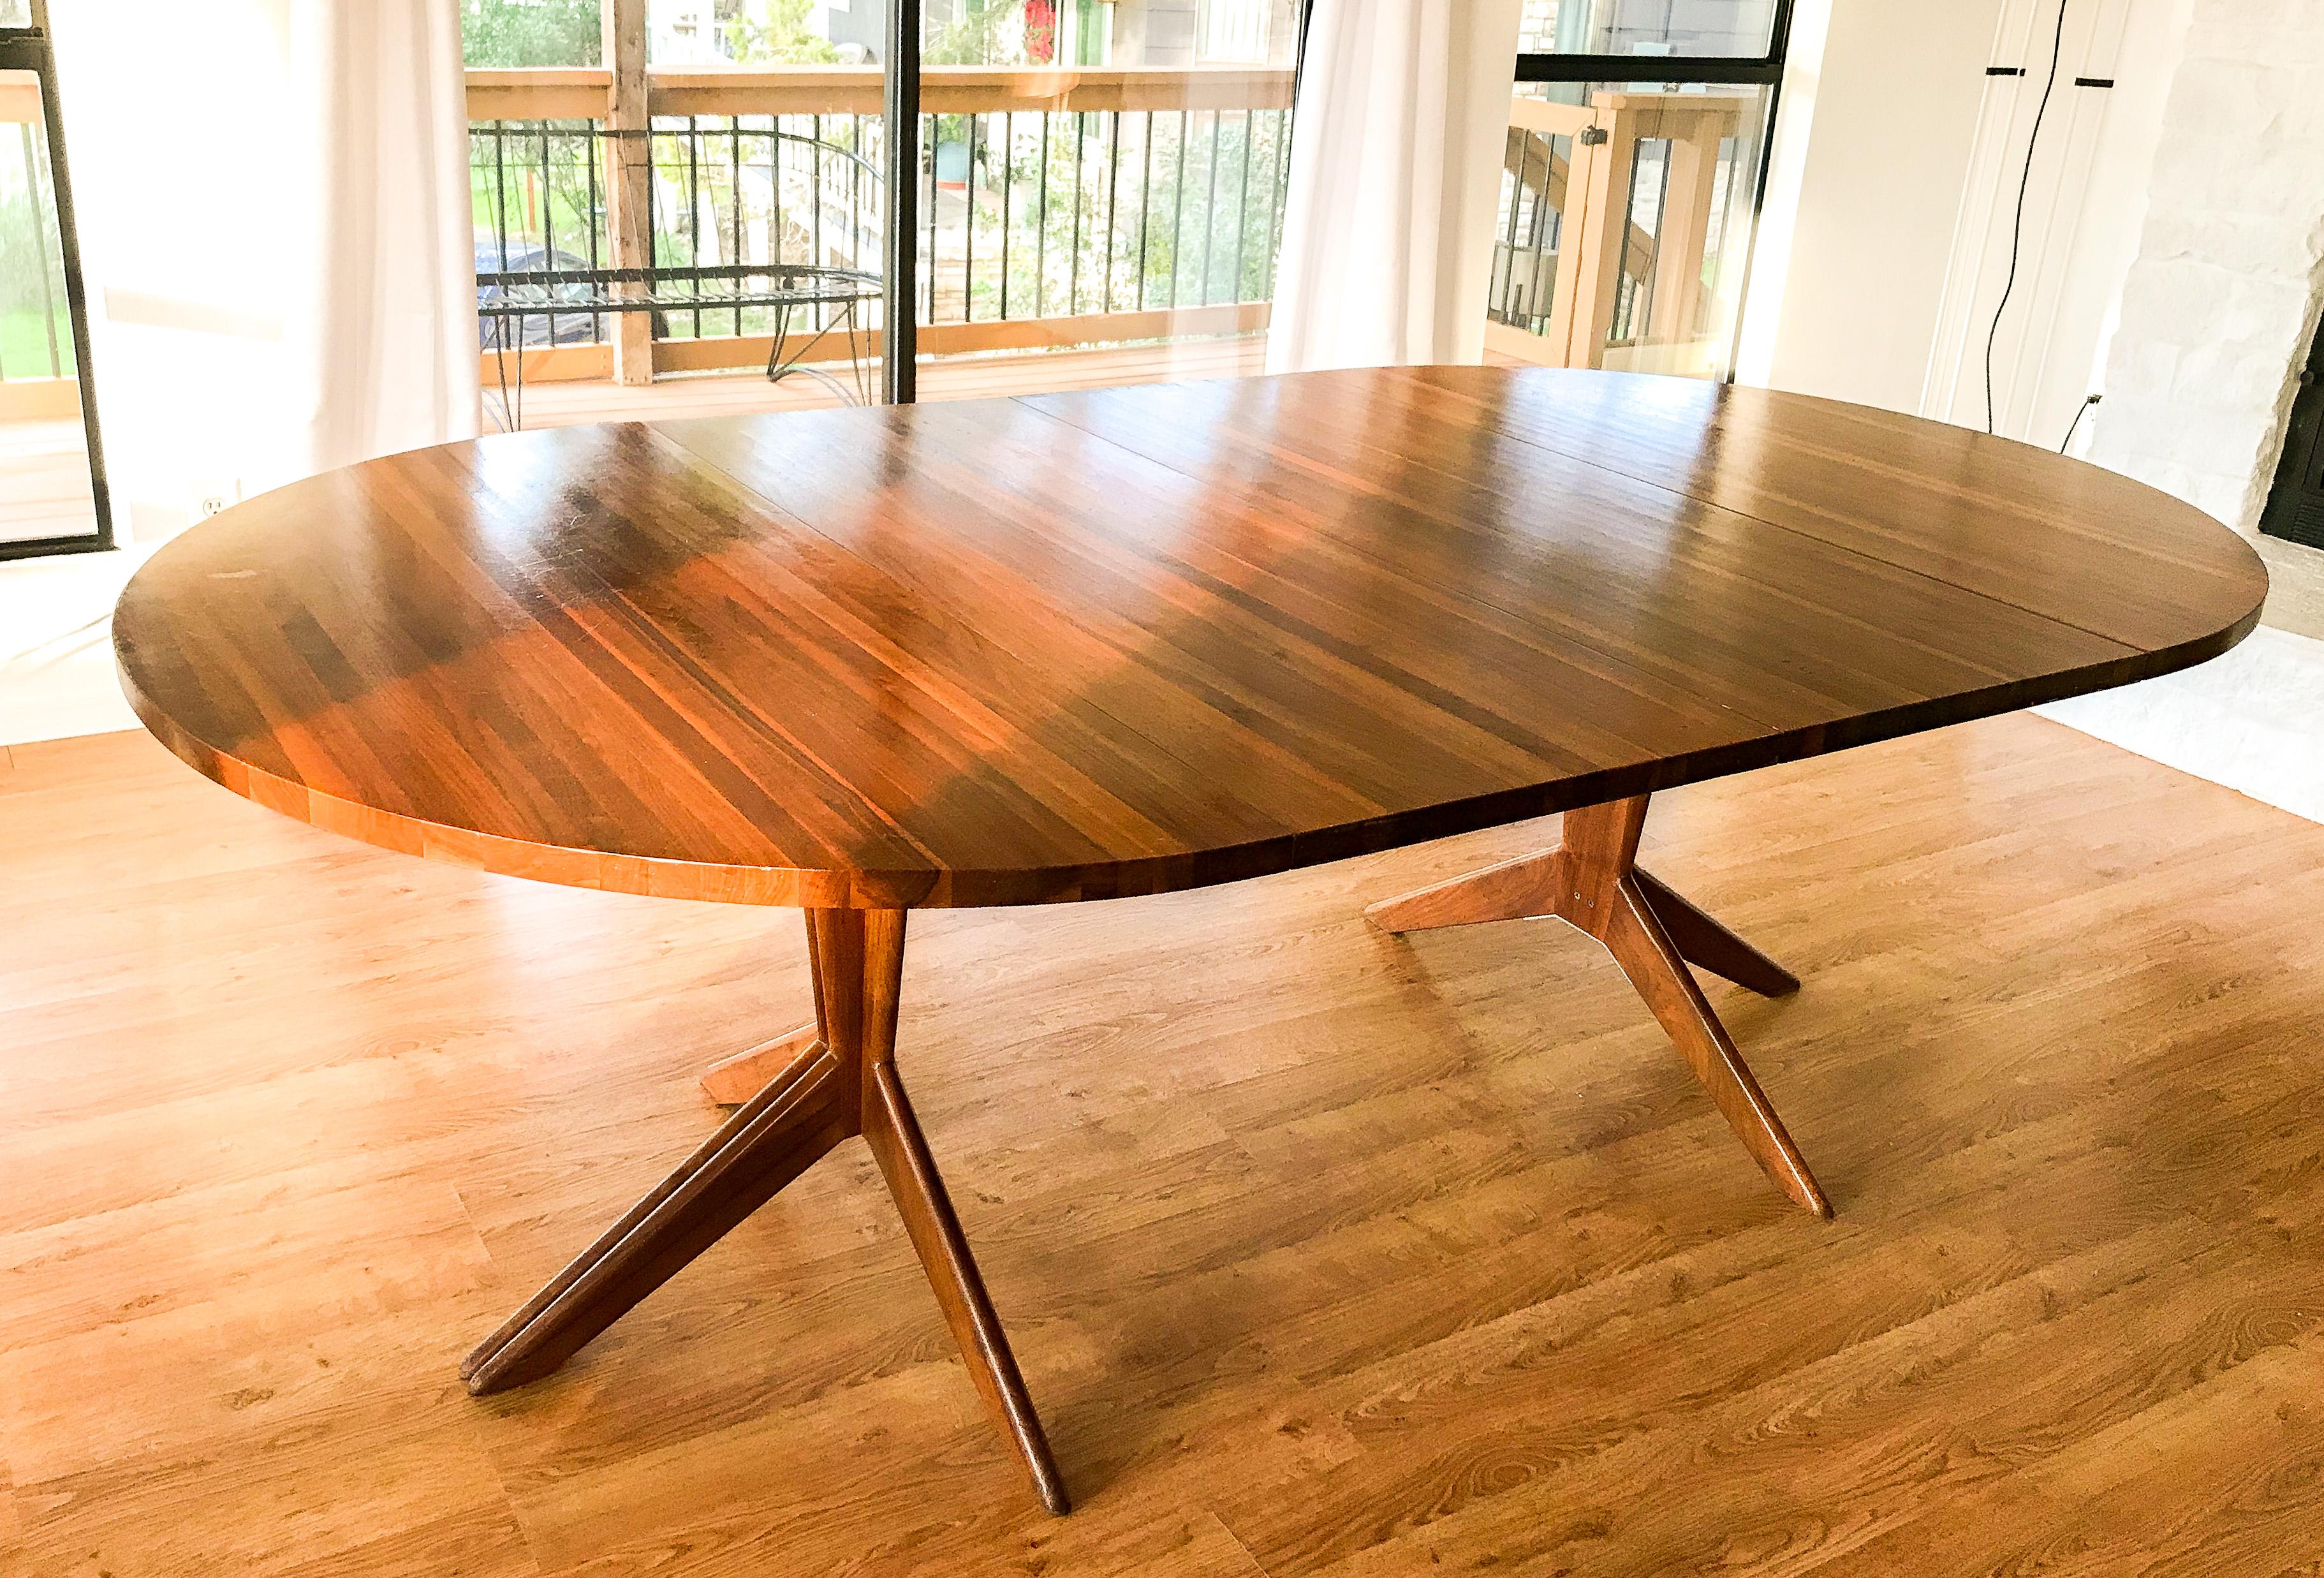 This vintage 1956 solid walnut pedestal extension dining table by Mel Smillow is in overall great condition. Shows wear consistent with age and use. Table base splits and expands to accommodate 1-3 leaves.
circa 1950s. USA.
Dimensions:
48